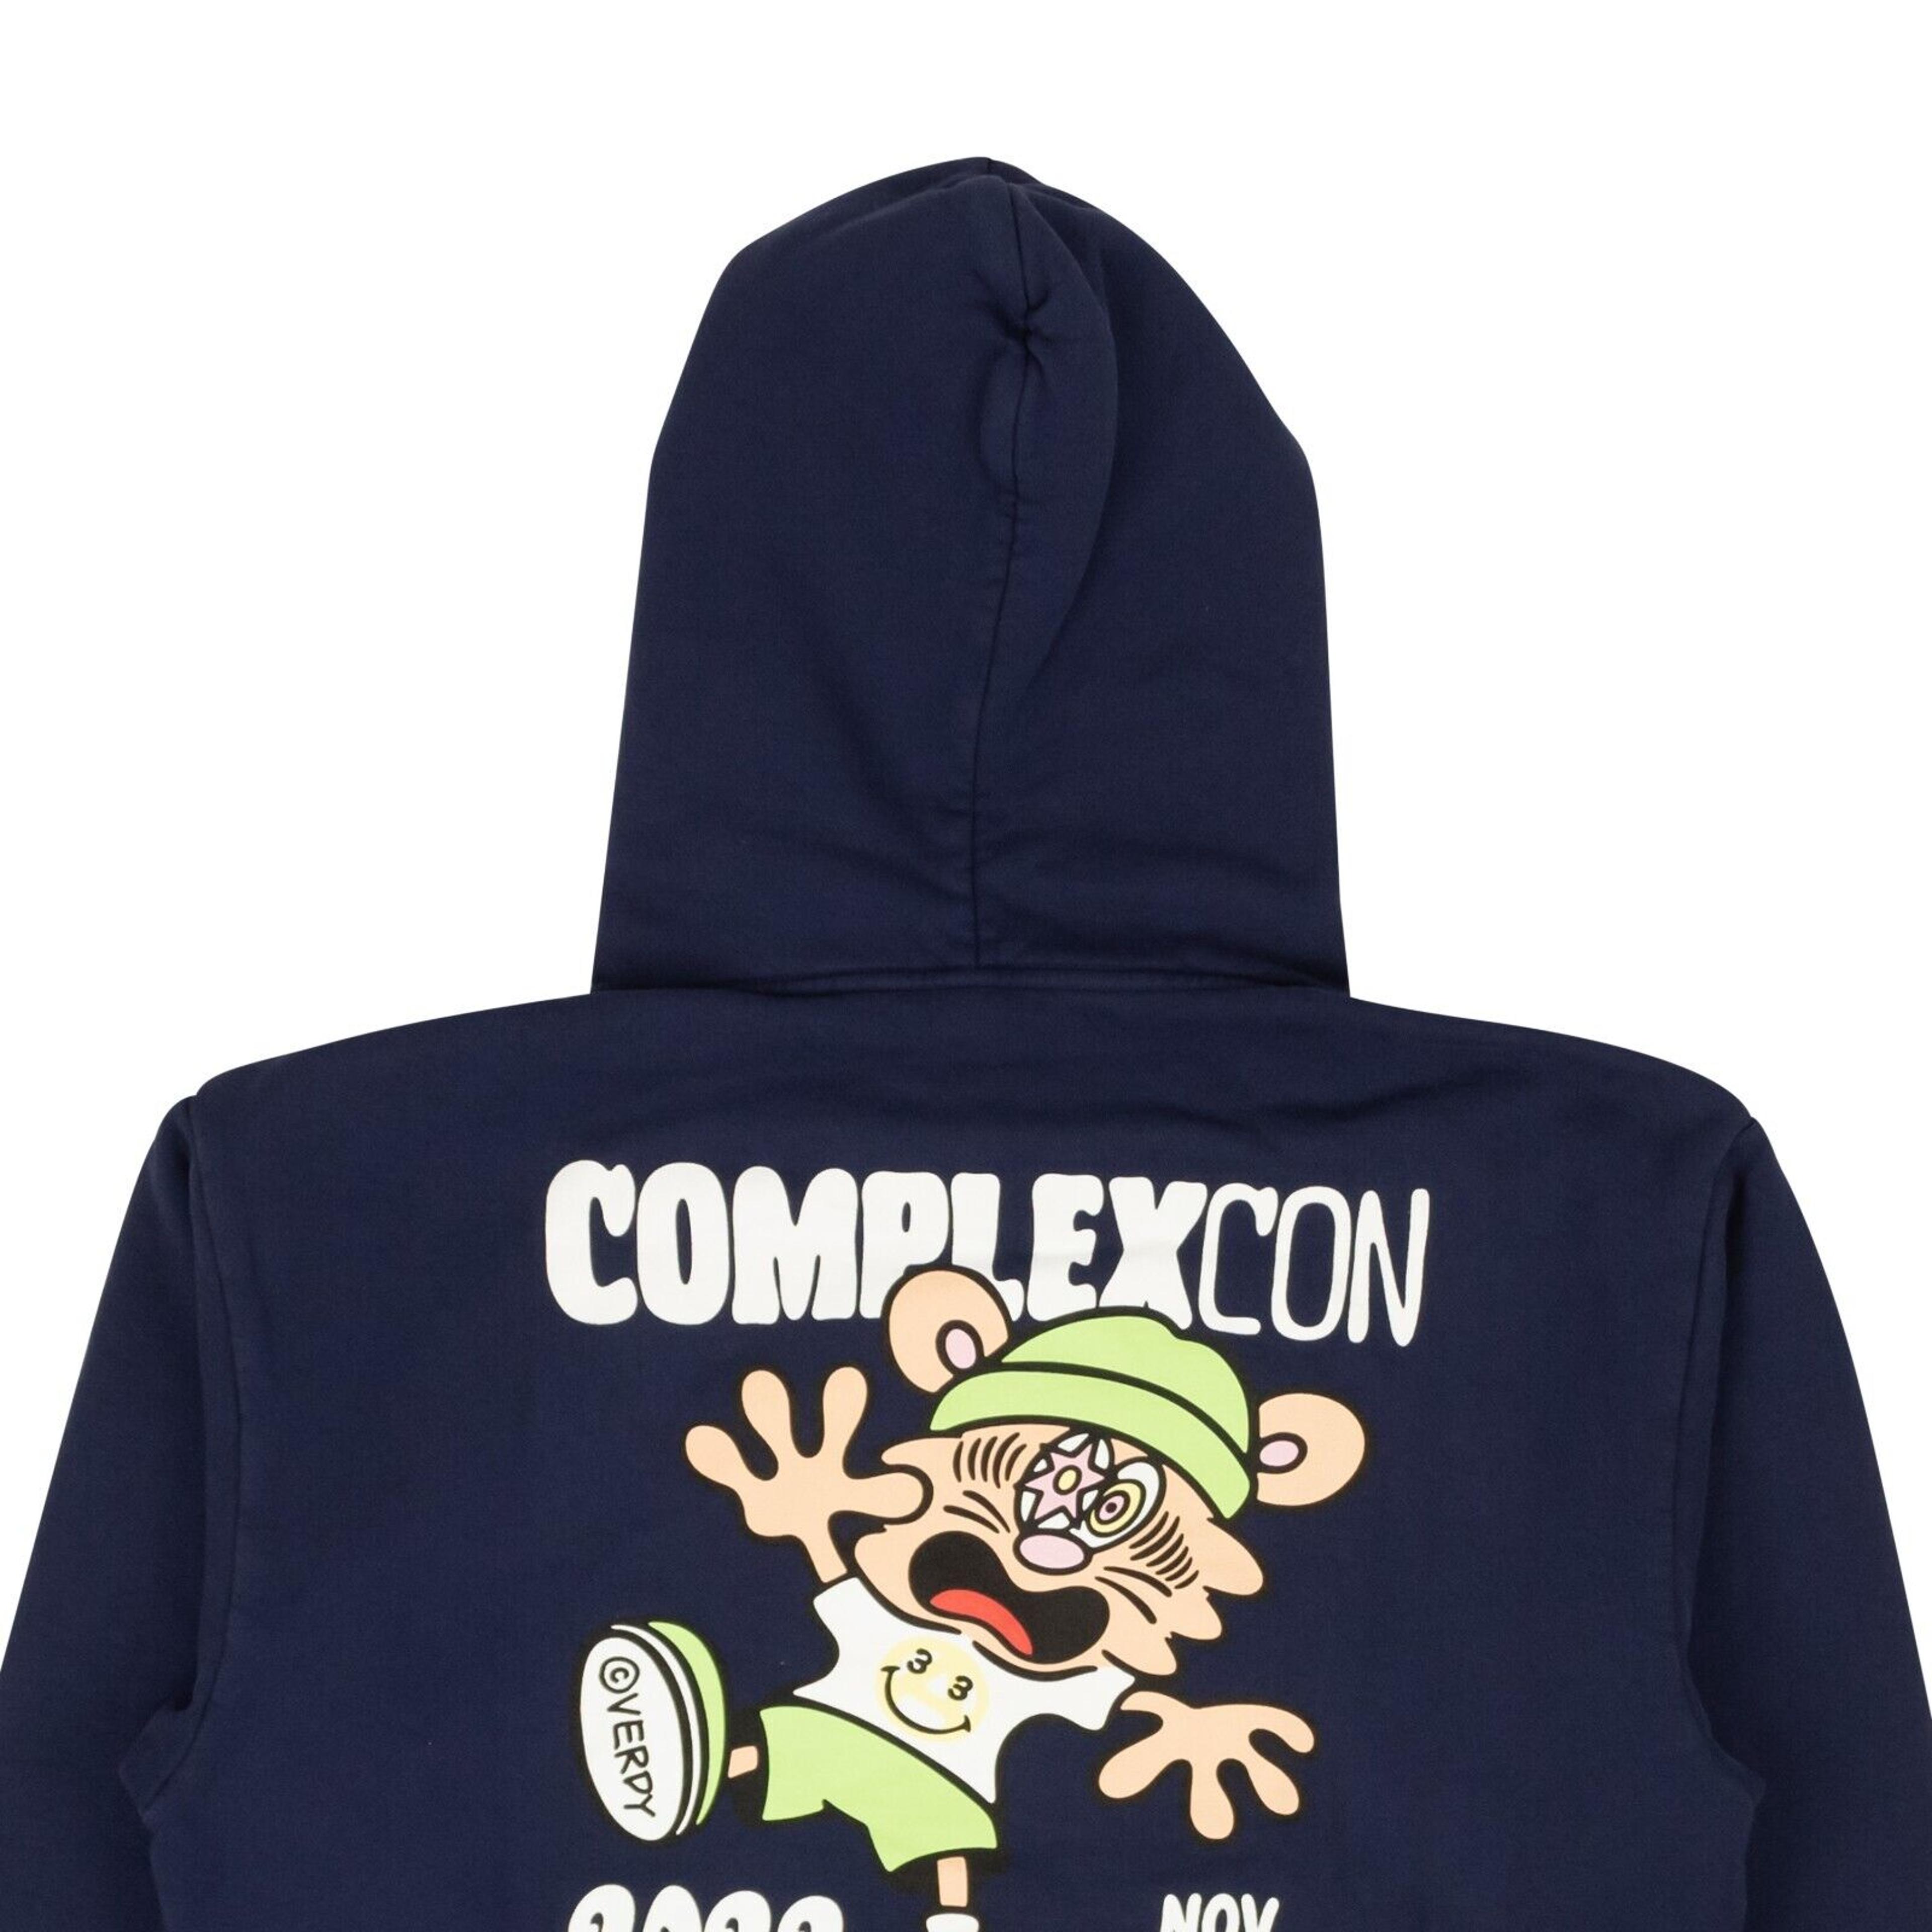 Alternate View 3 of Complexcon X Verdy Hoodie - Navy